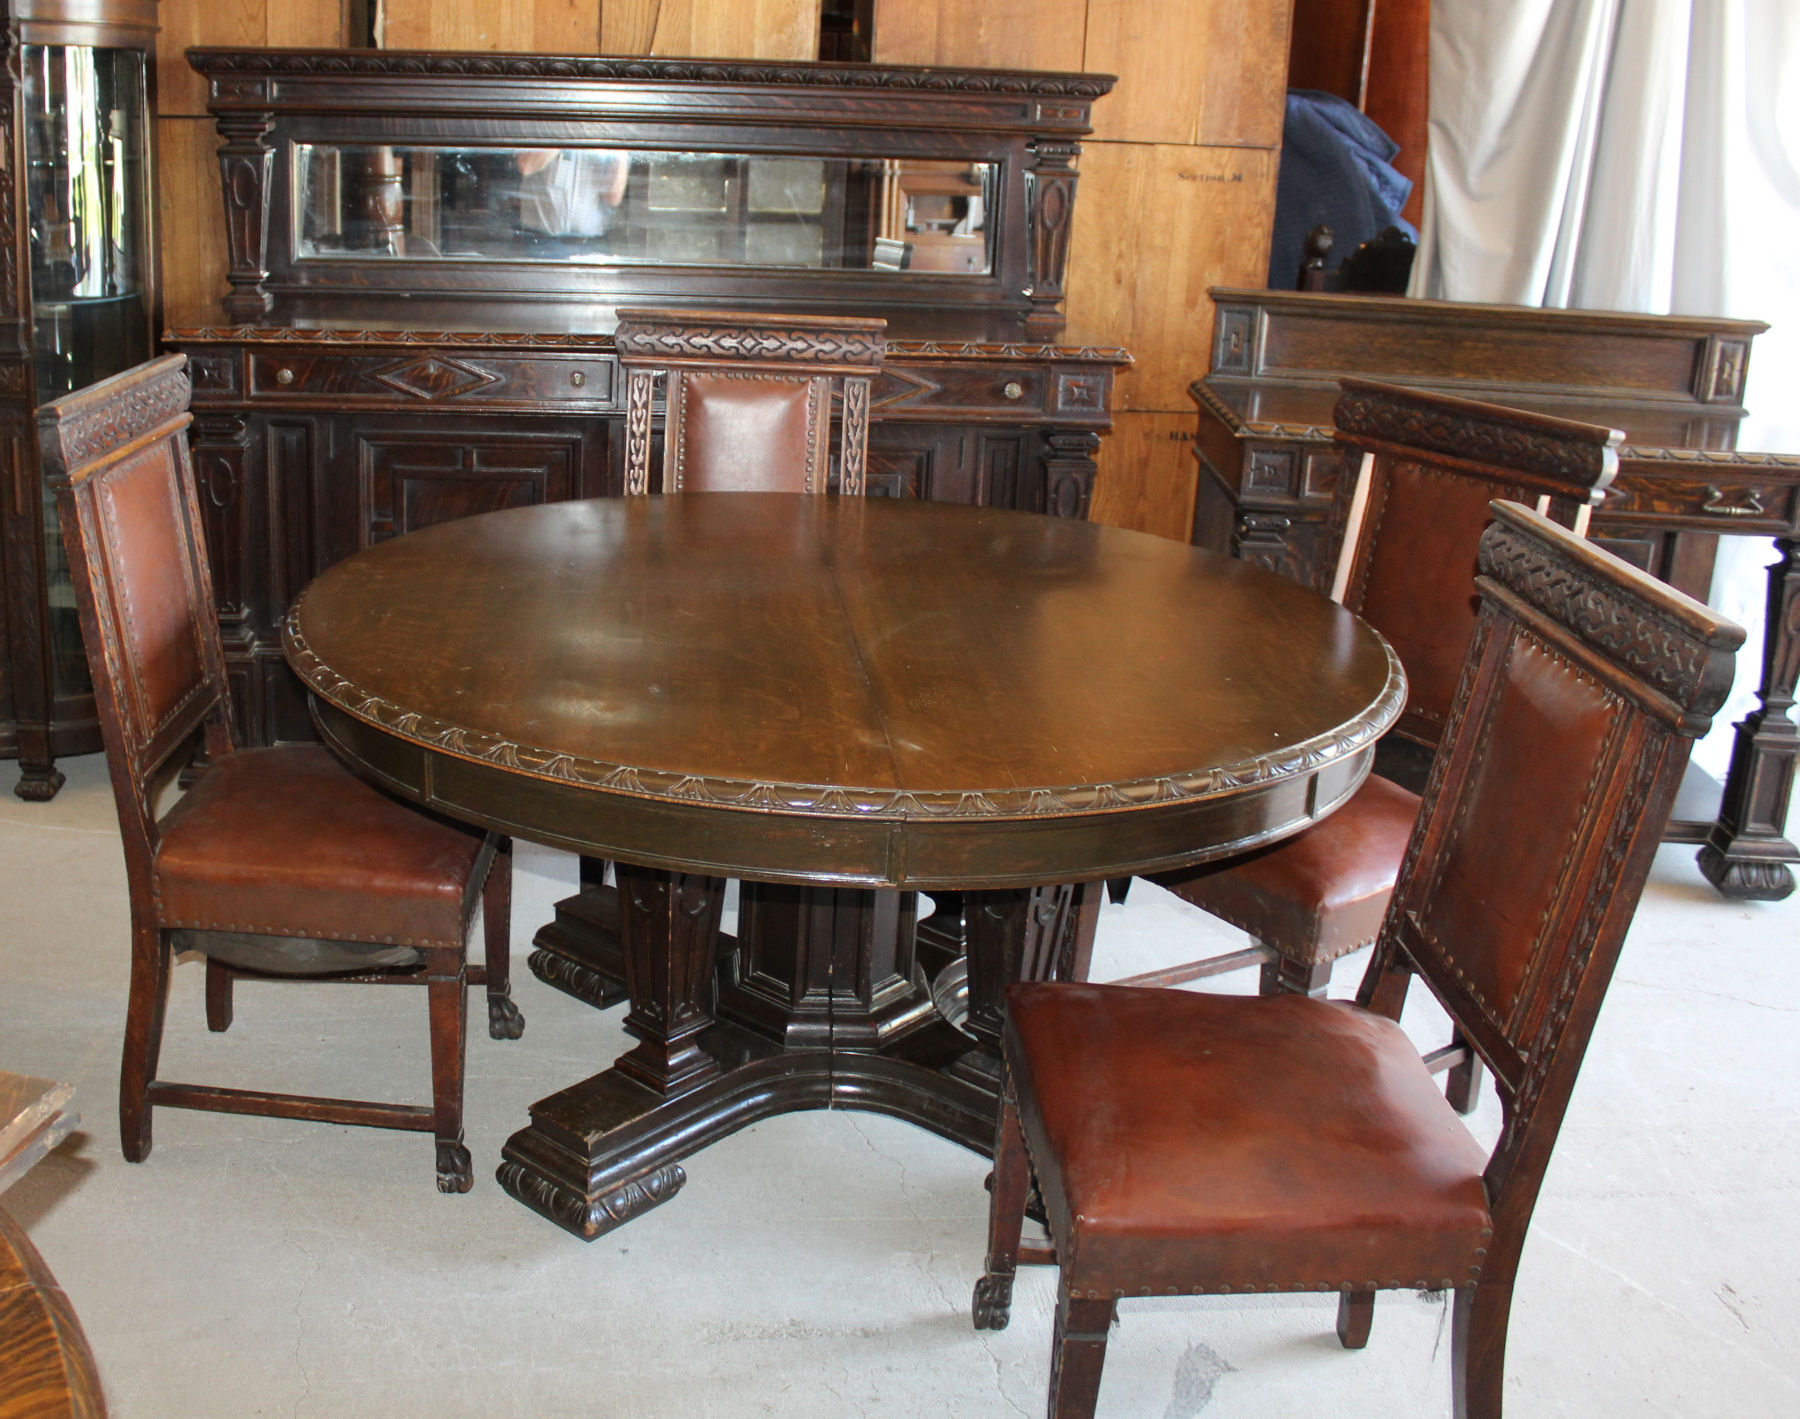 Antique Oak Dining Room Set, Antique Oak Dining Room Table And Chairs Set